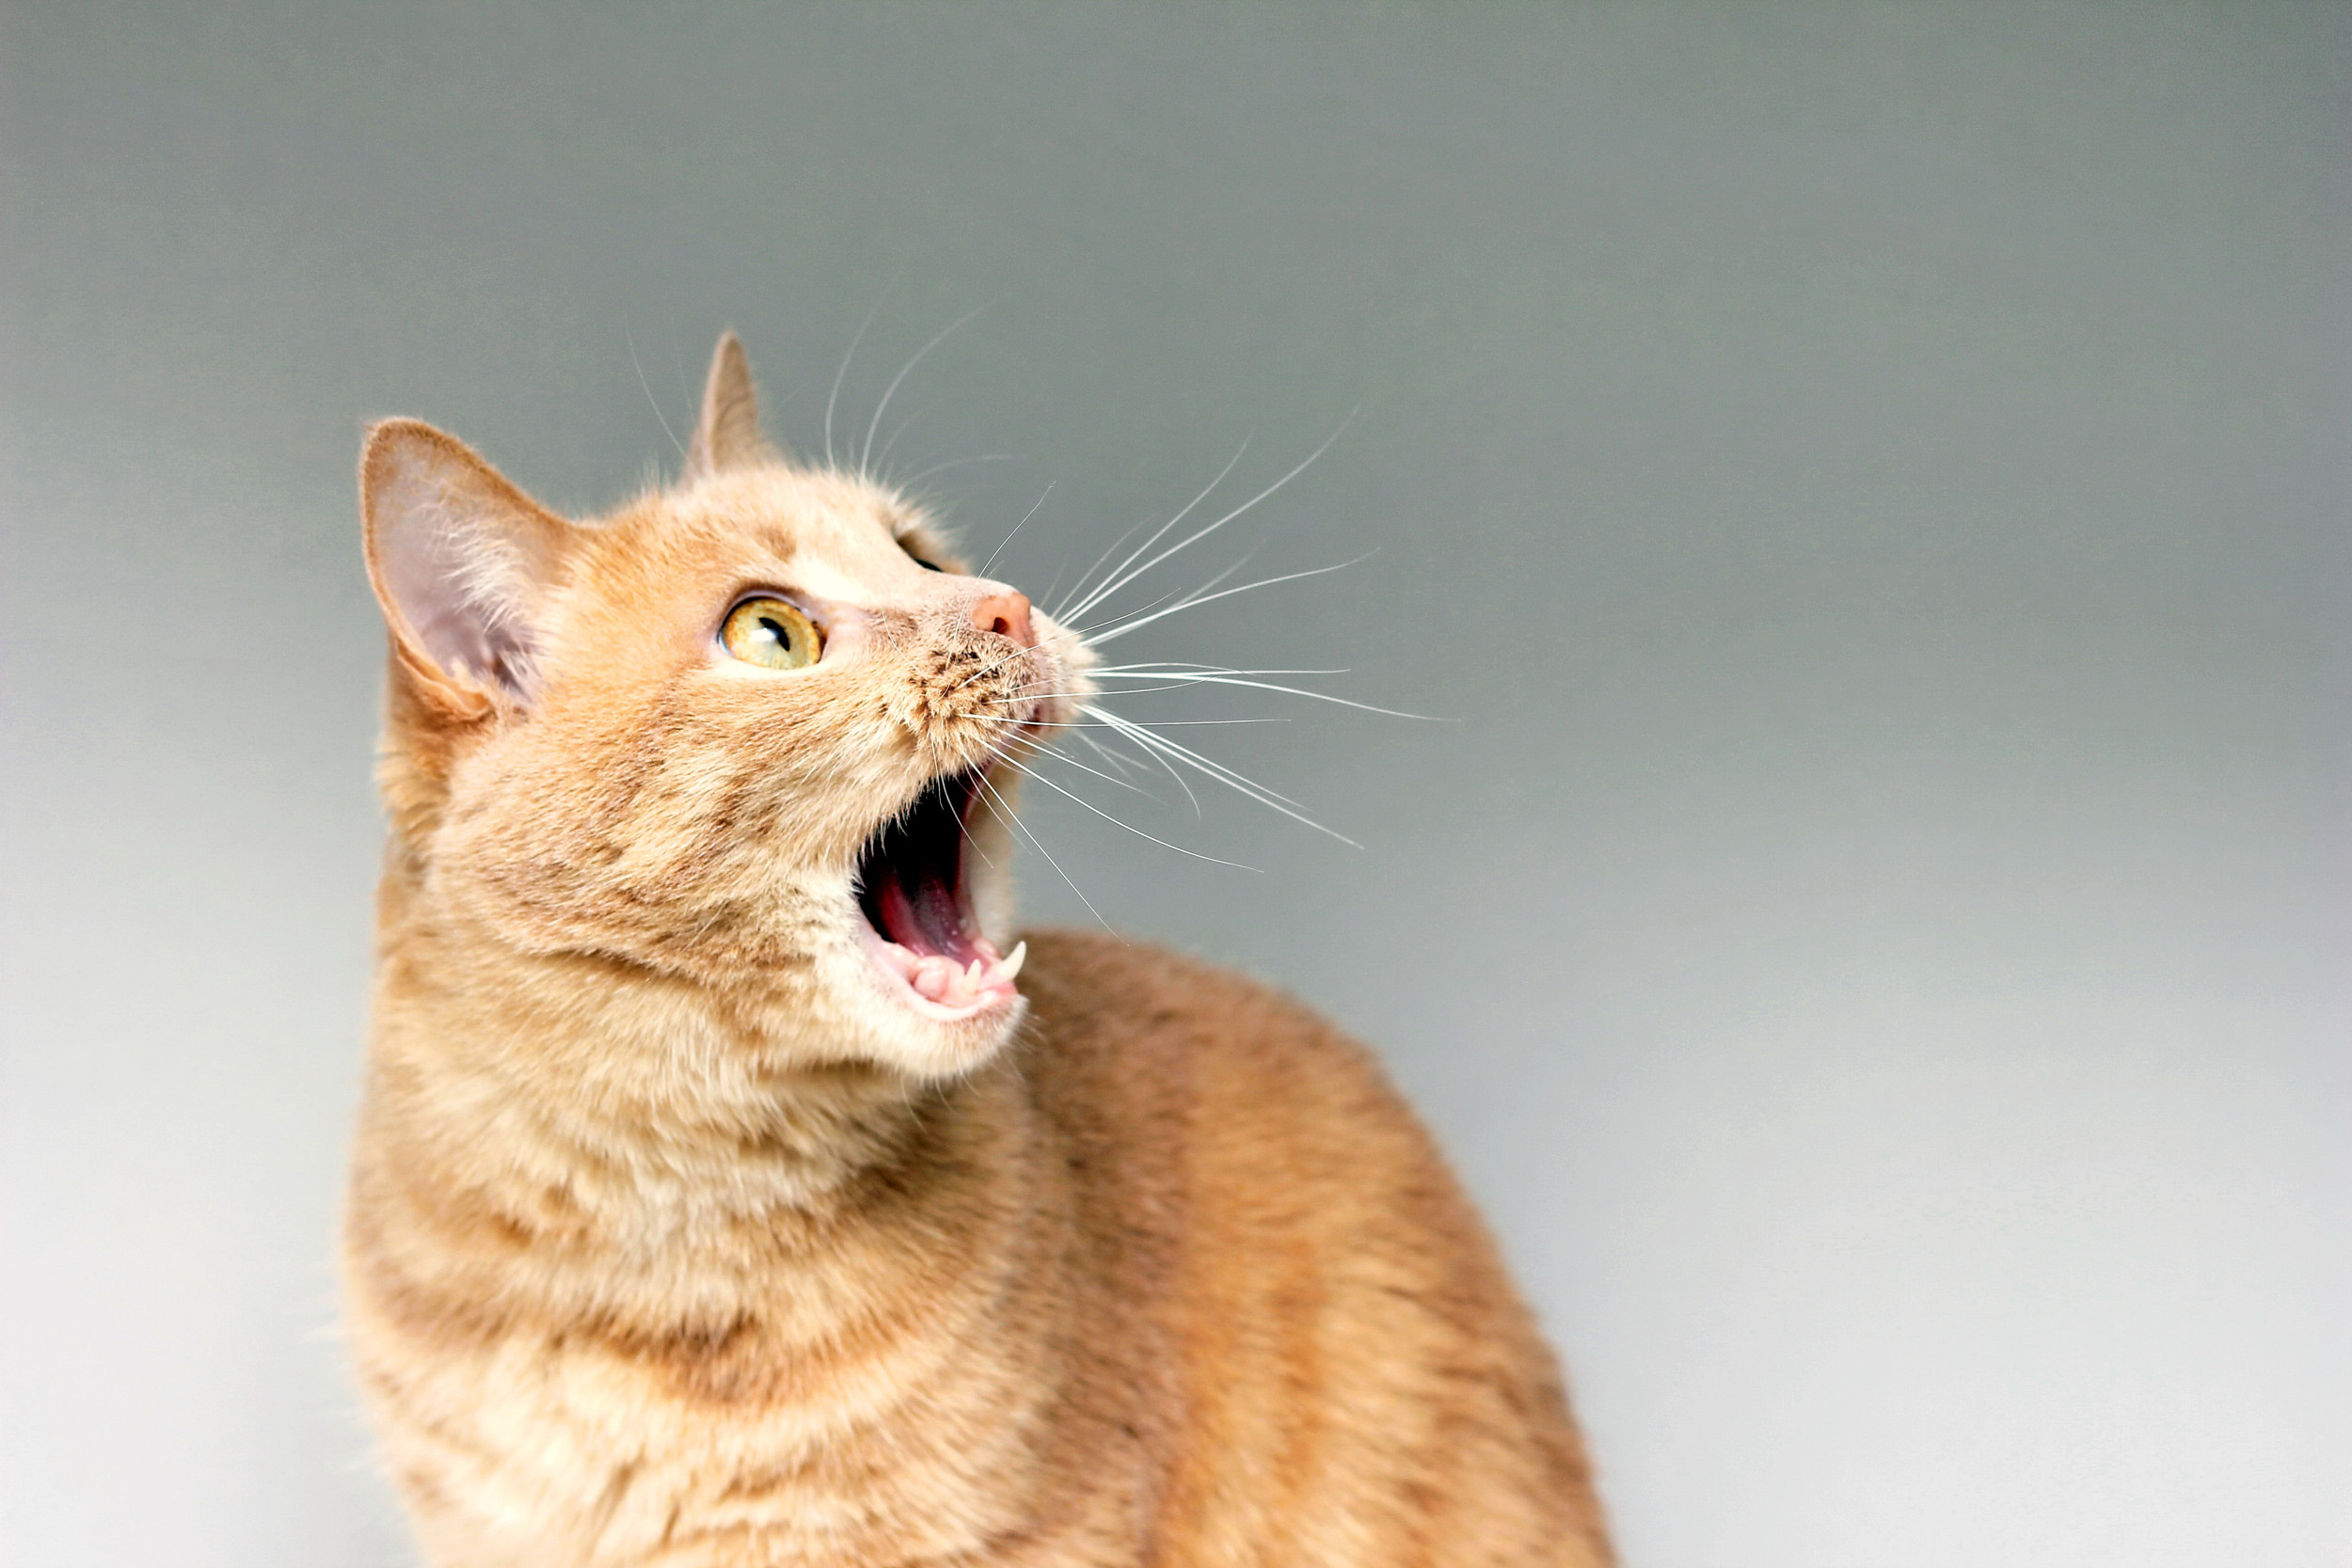 Why am I a scaredy cat and you're not? The science of fright